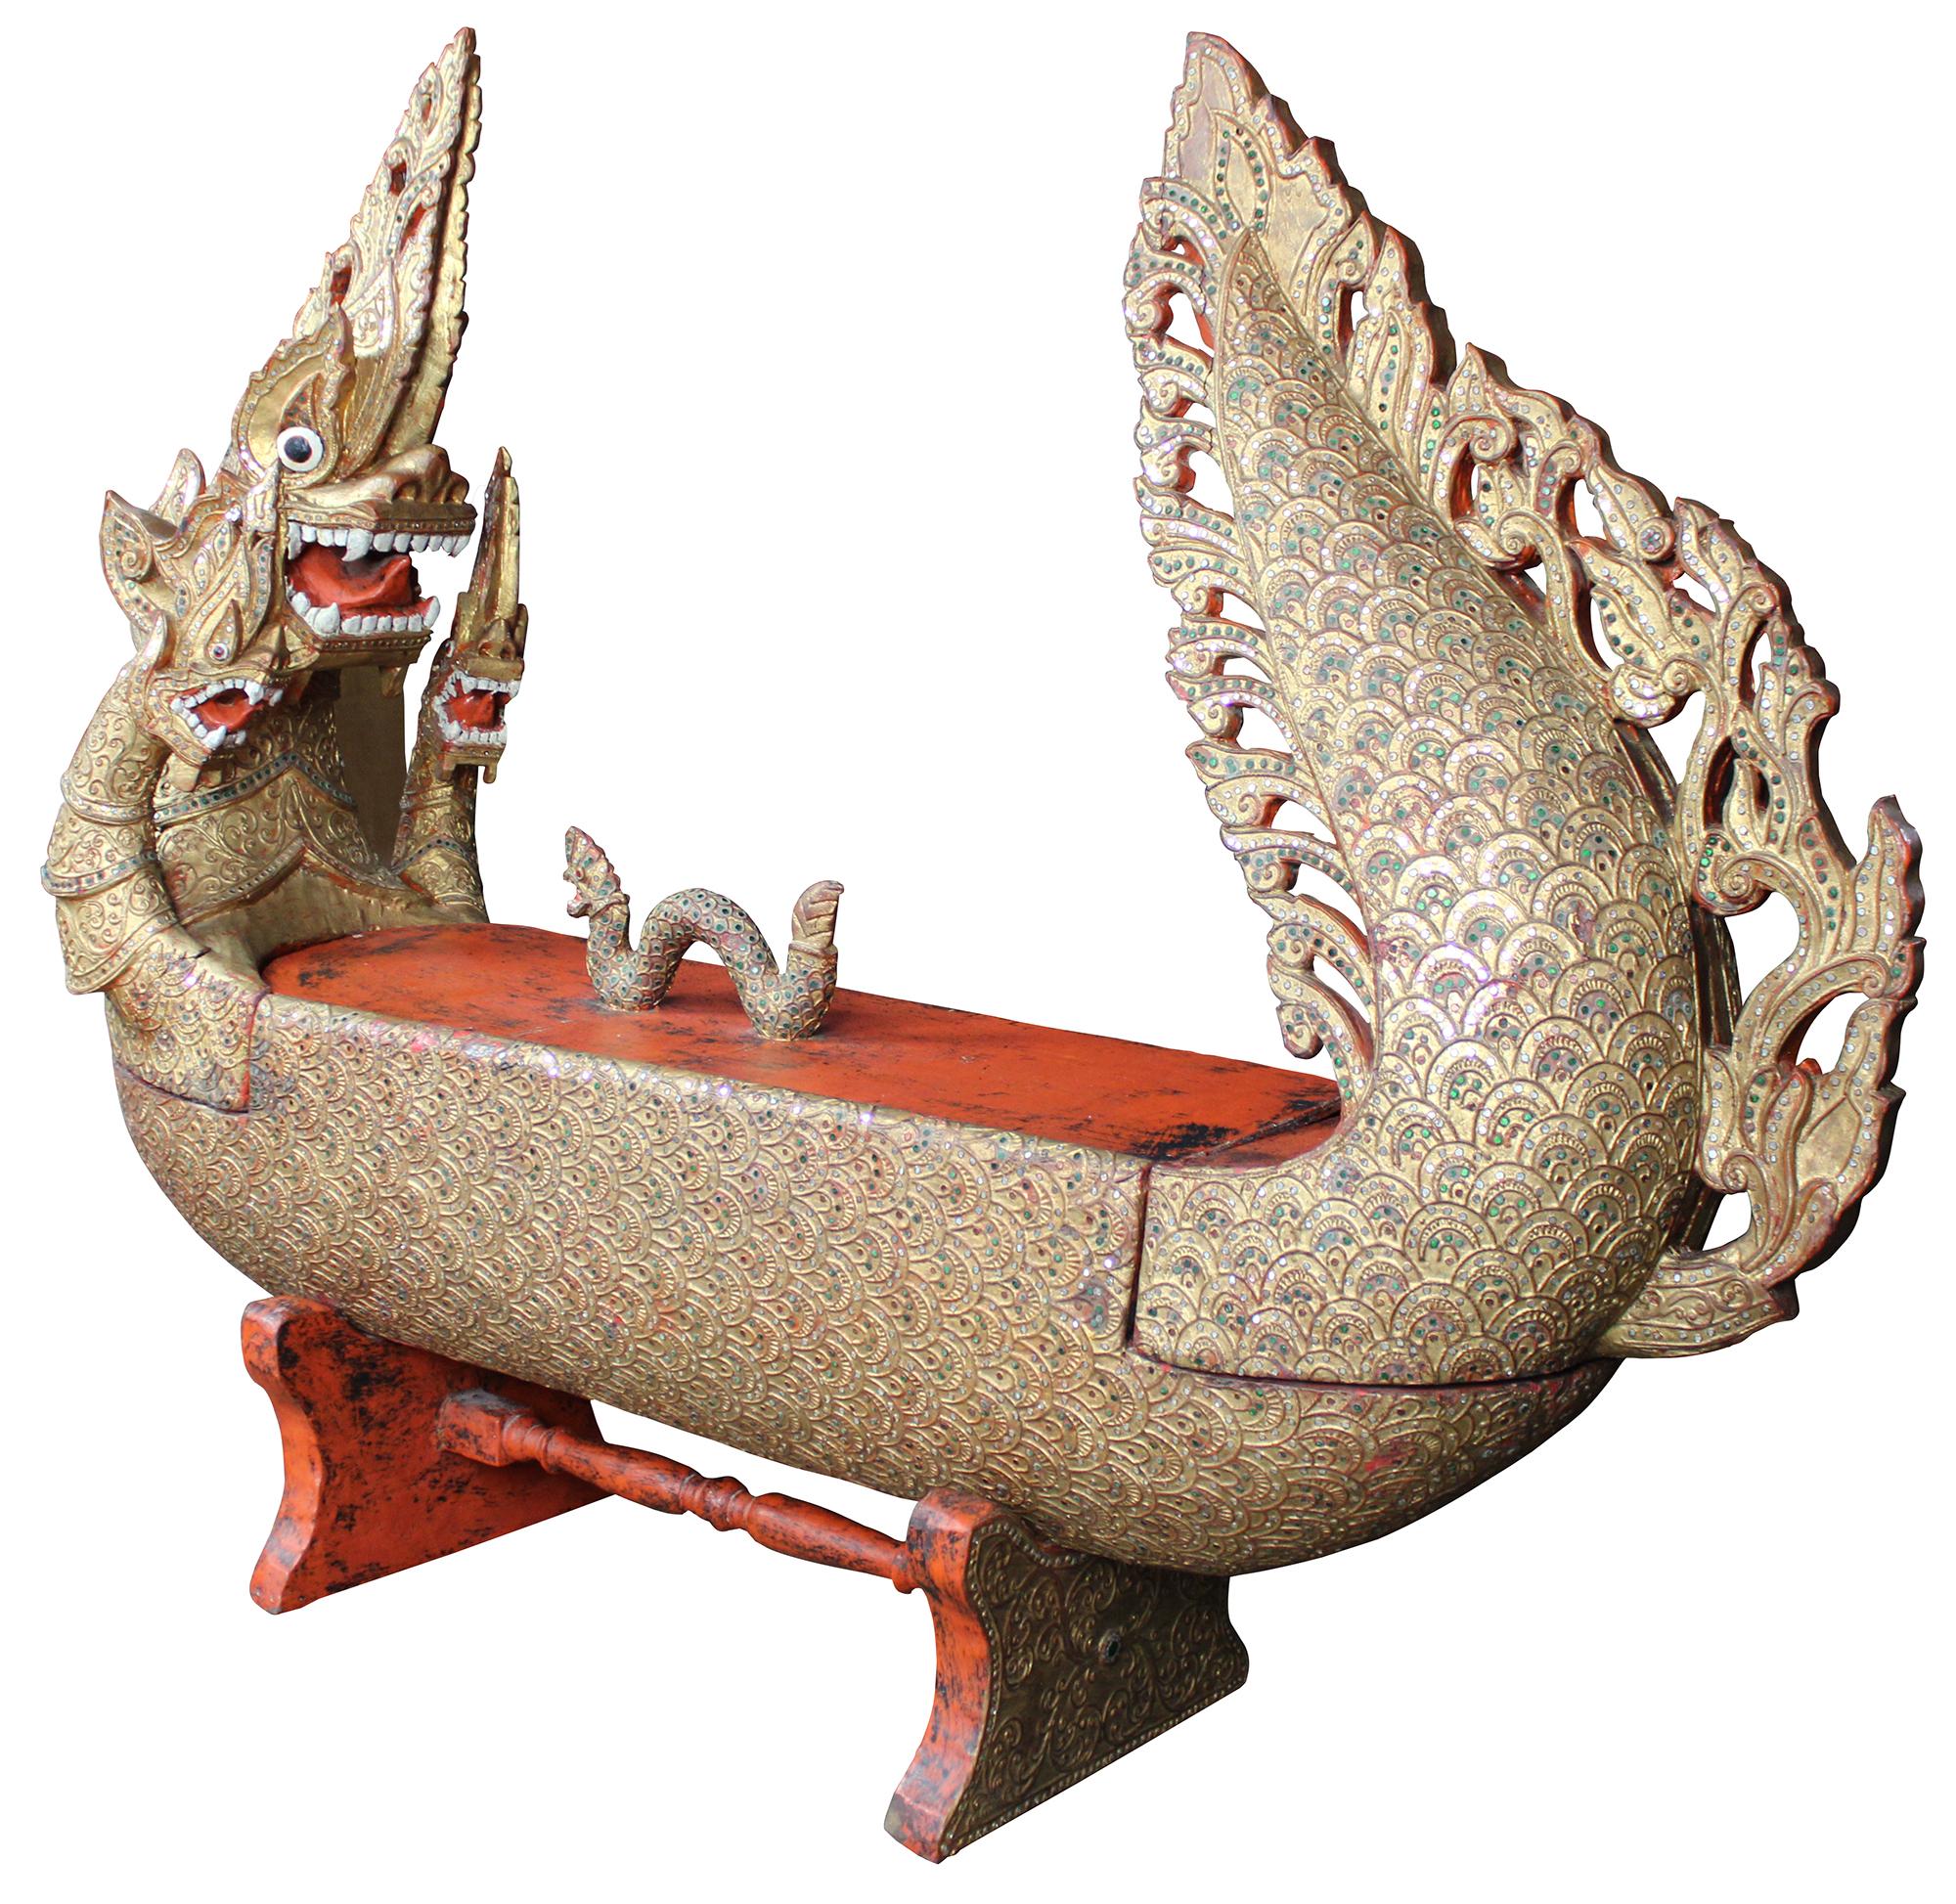 Elaborately carved Burmese Royal Barge boat box. Features red lacquered finish, with gold gilt, embellished with jeweled inserts. Dragon / serpent motif handle lid reveals storage compartment.

Measures: Storage area 8.5